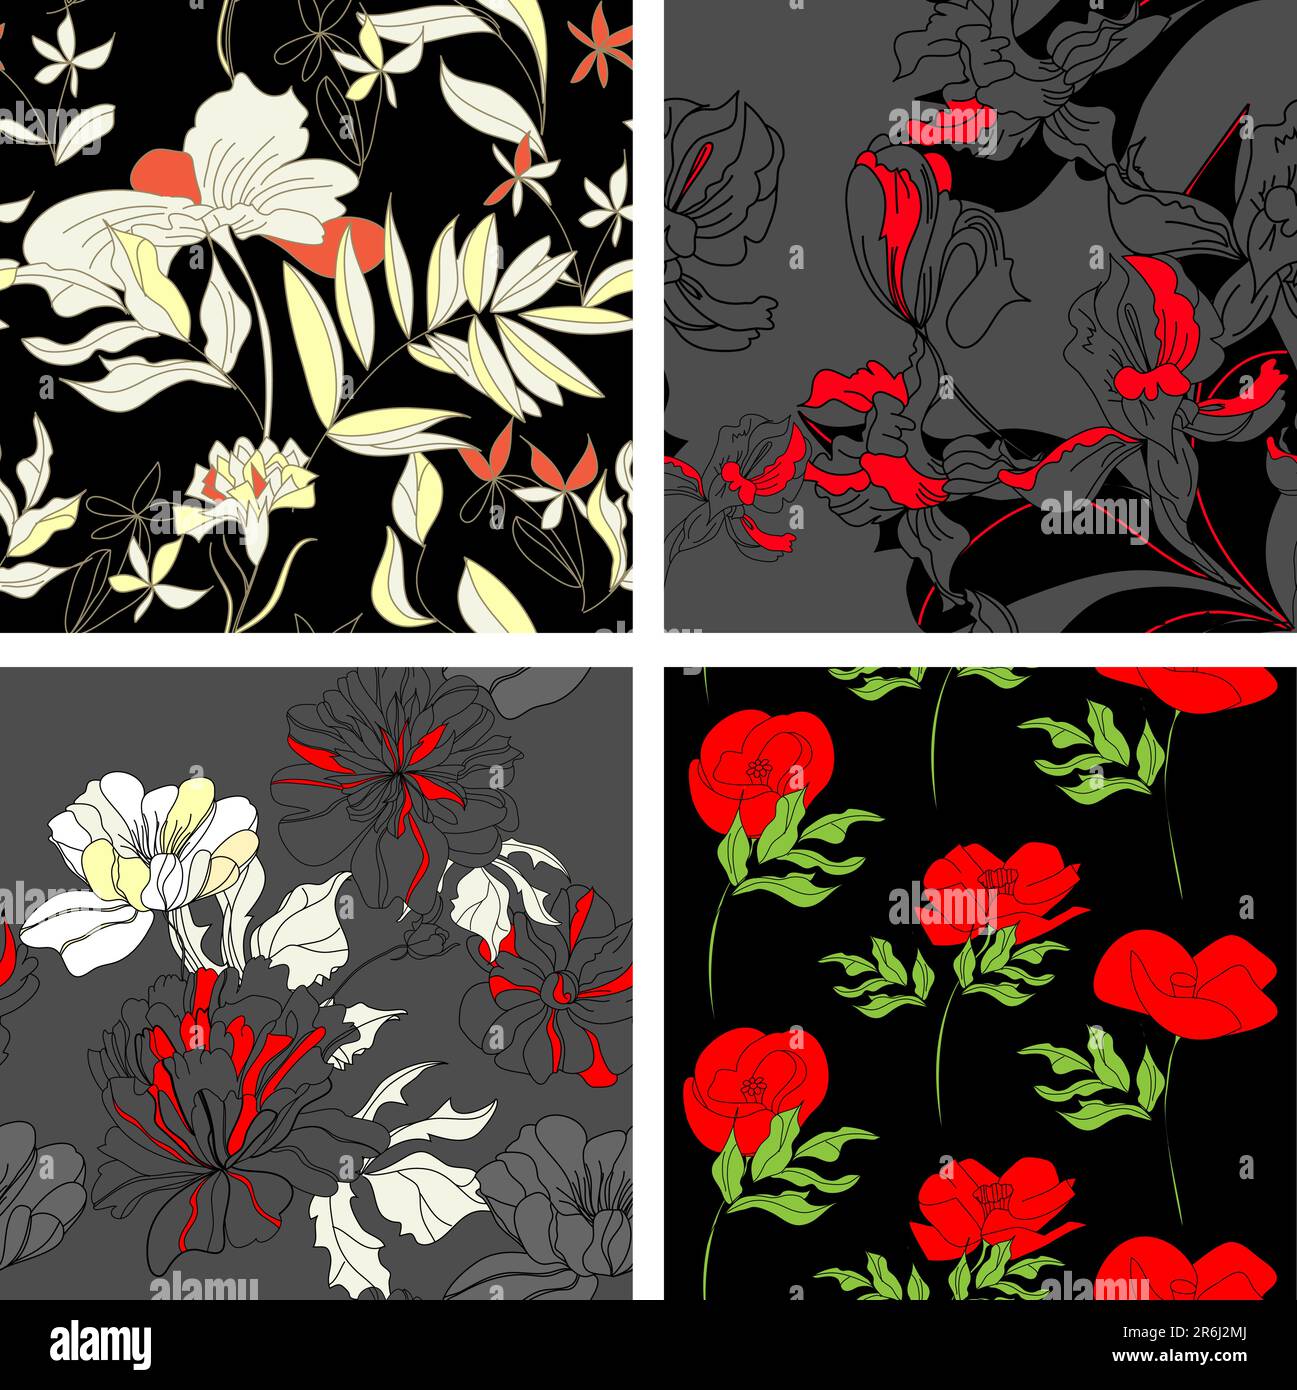 Vector Set Of Floral Graphic Design Elements With Flowers